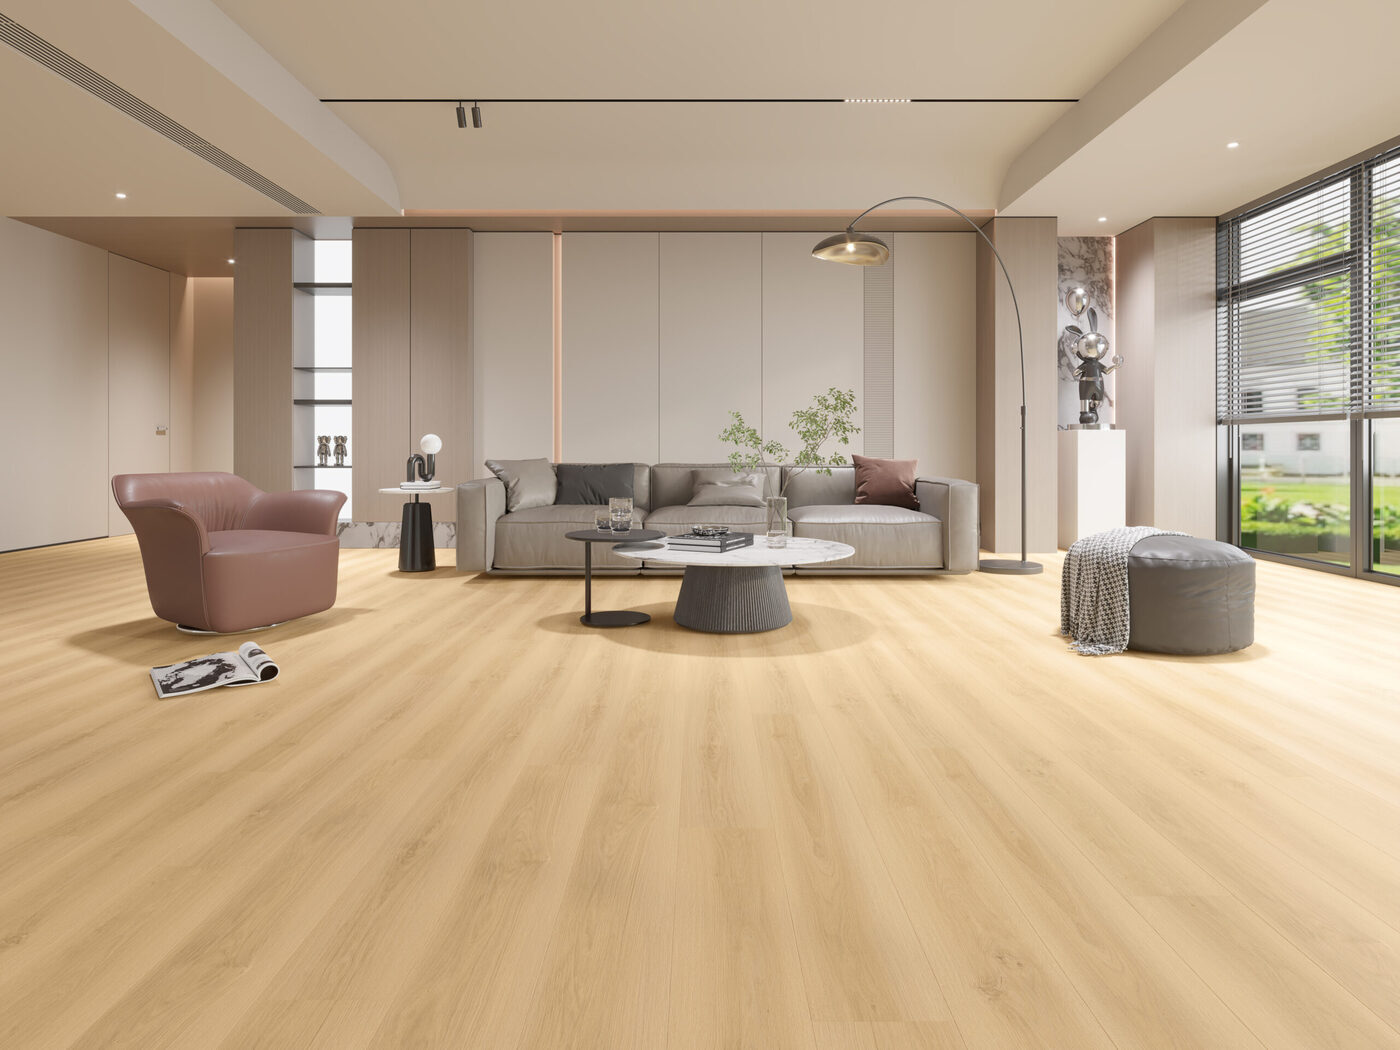 With its top-quality products, excellent customer service, and wholesale pricing, the store has become the go-to destination for laminate and waterproof luxury vinyl flooring in Los Angeles.